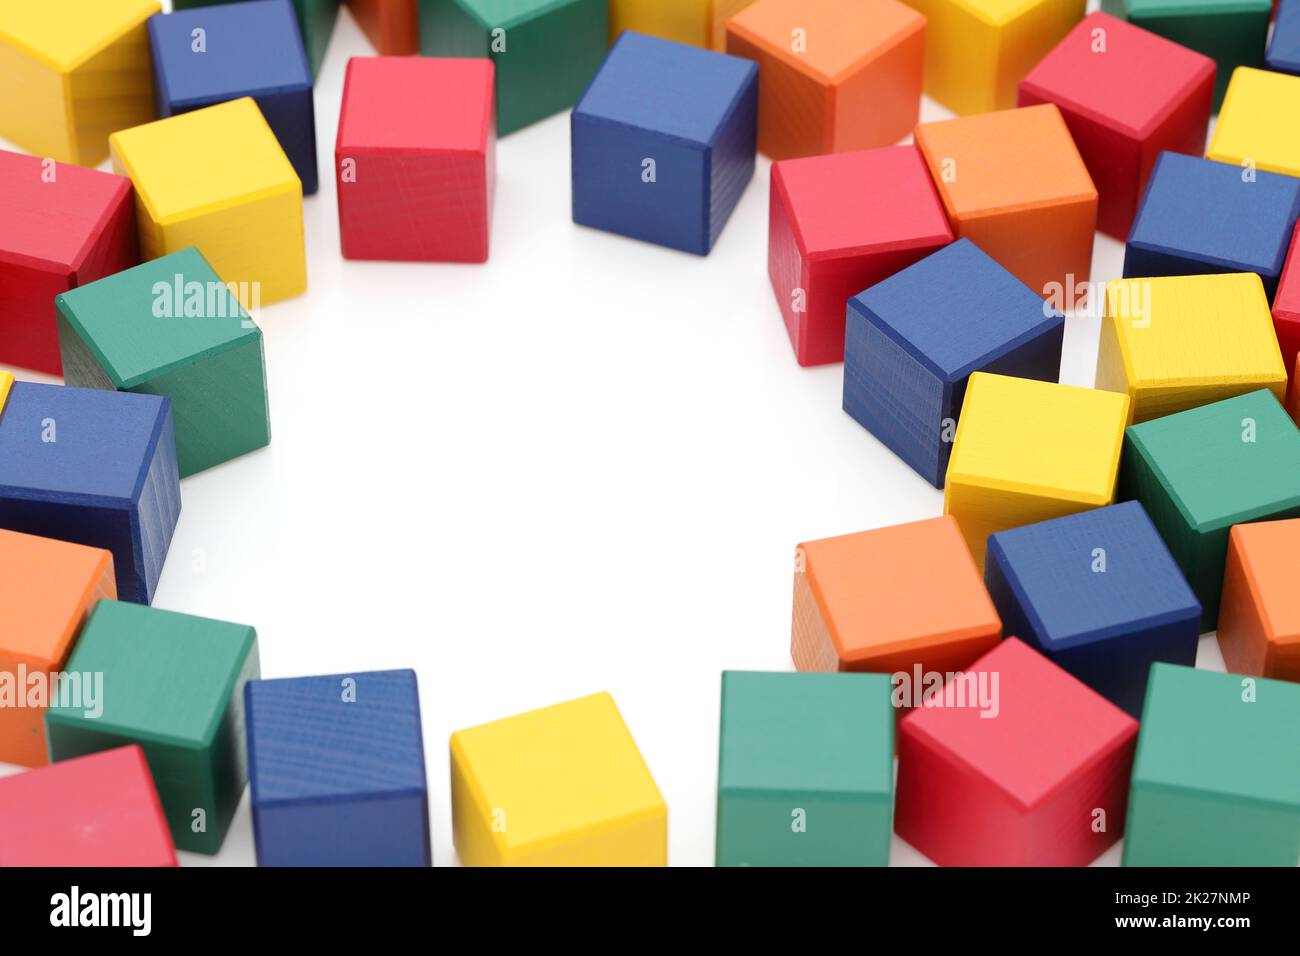 frame of colorful wooden building blocks on a white background Stock Photo